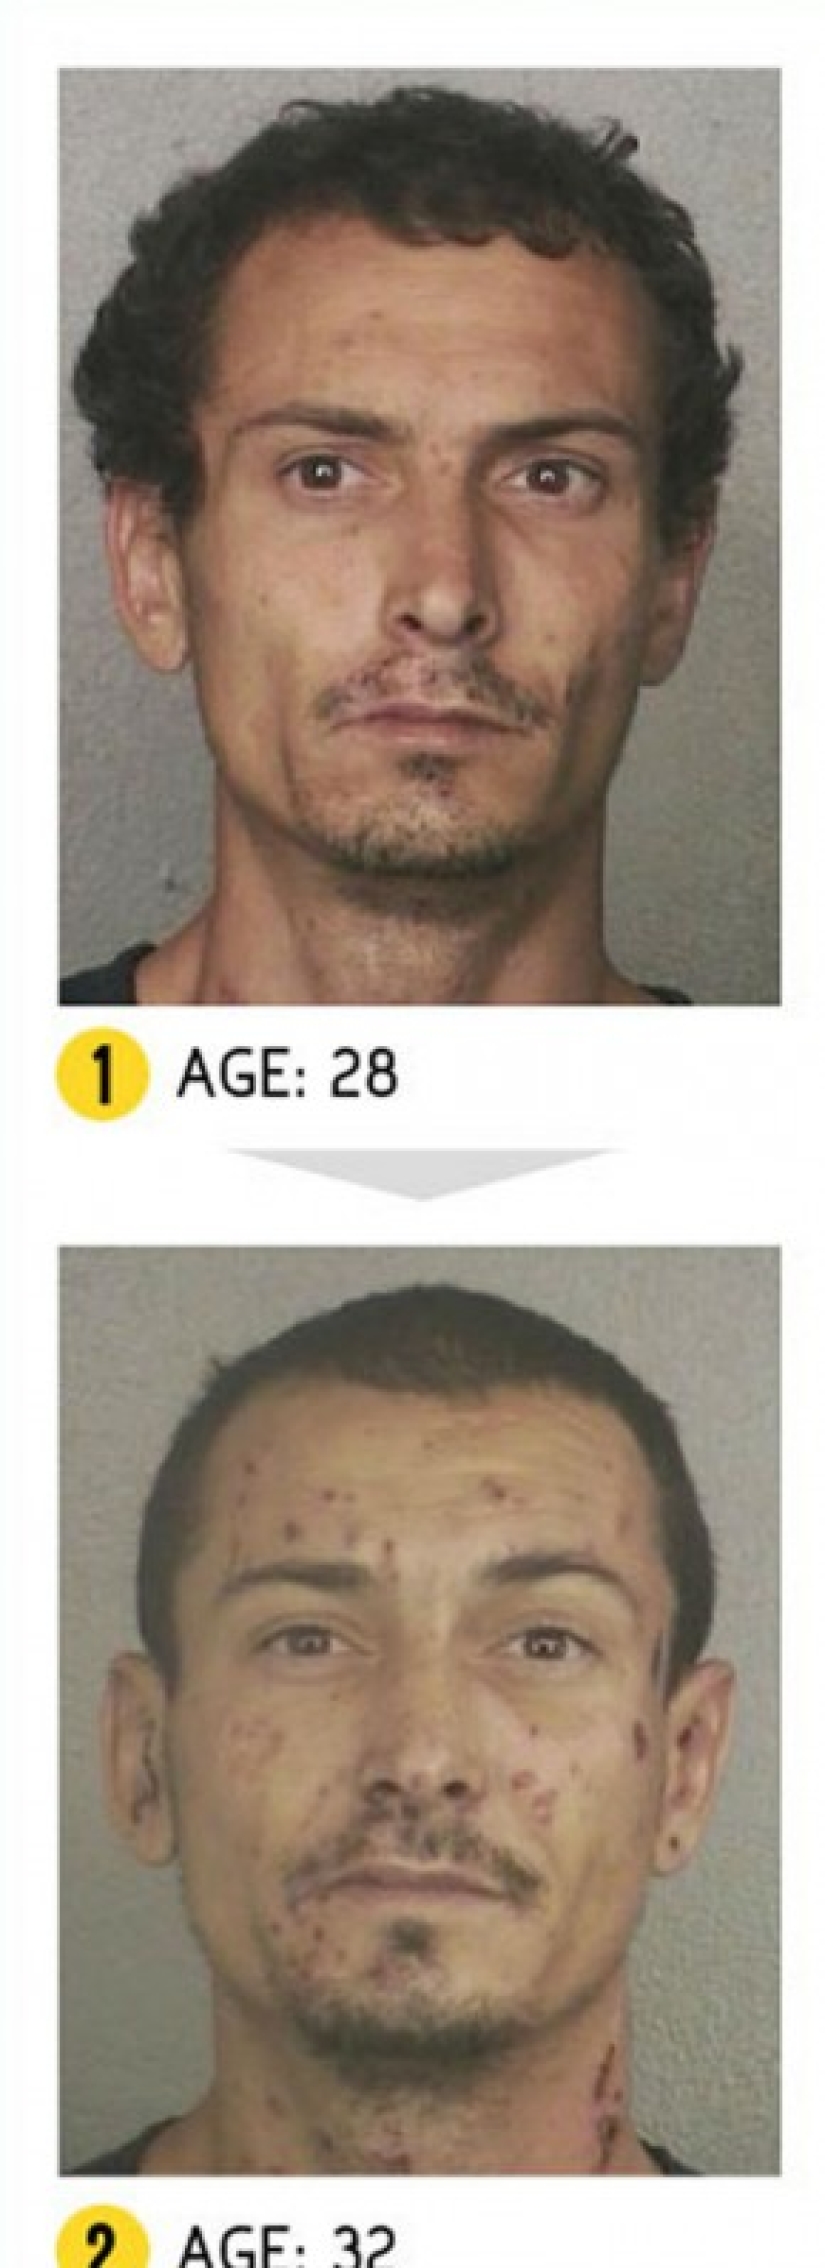 The result is obvious — how a person's appearance changes because of drugs